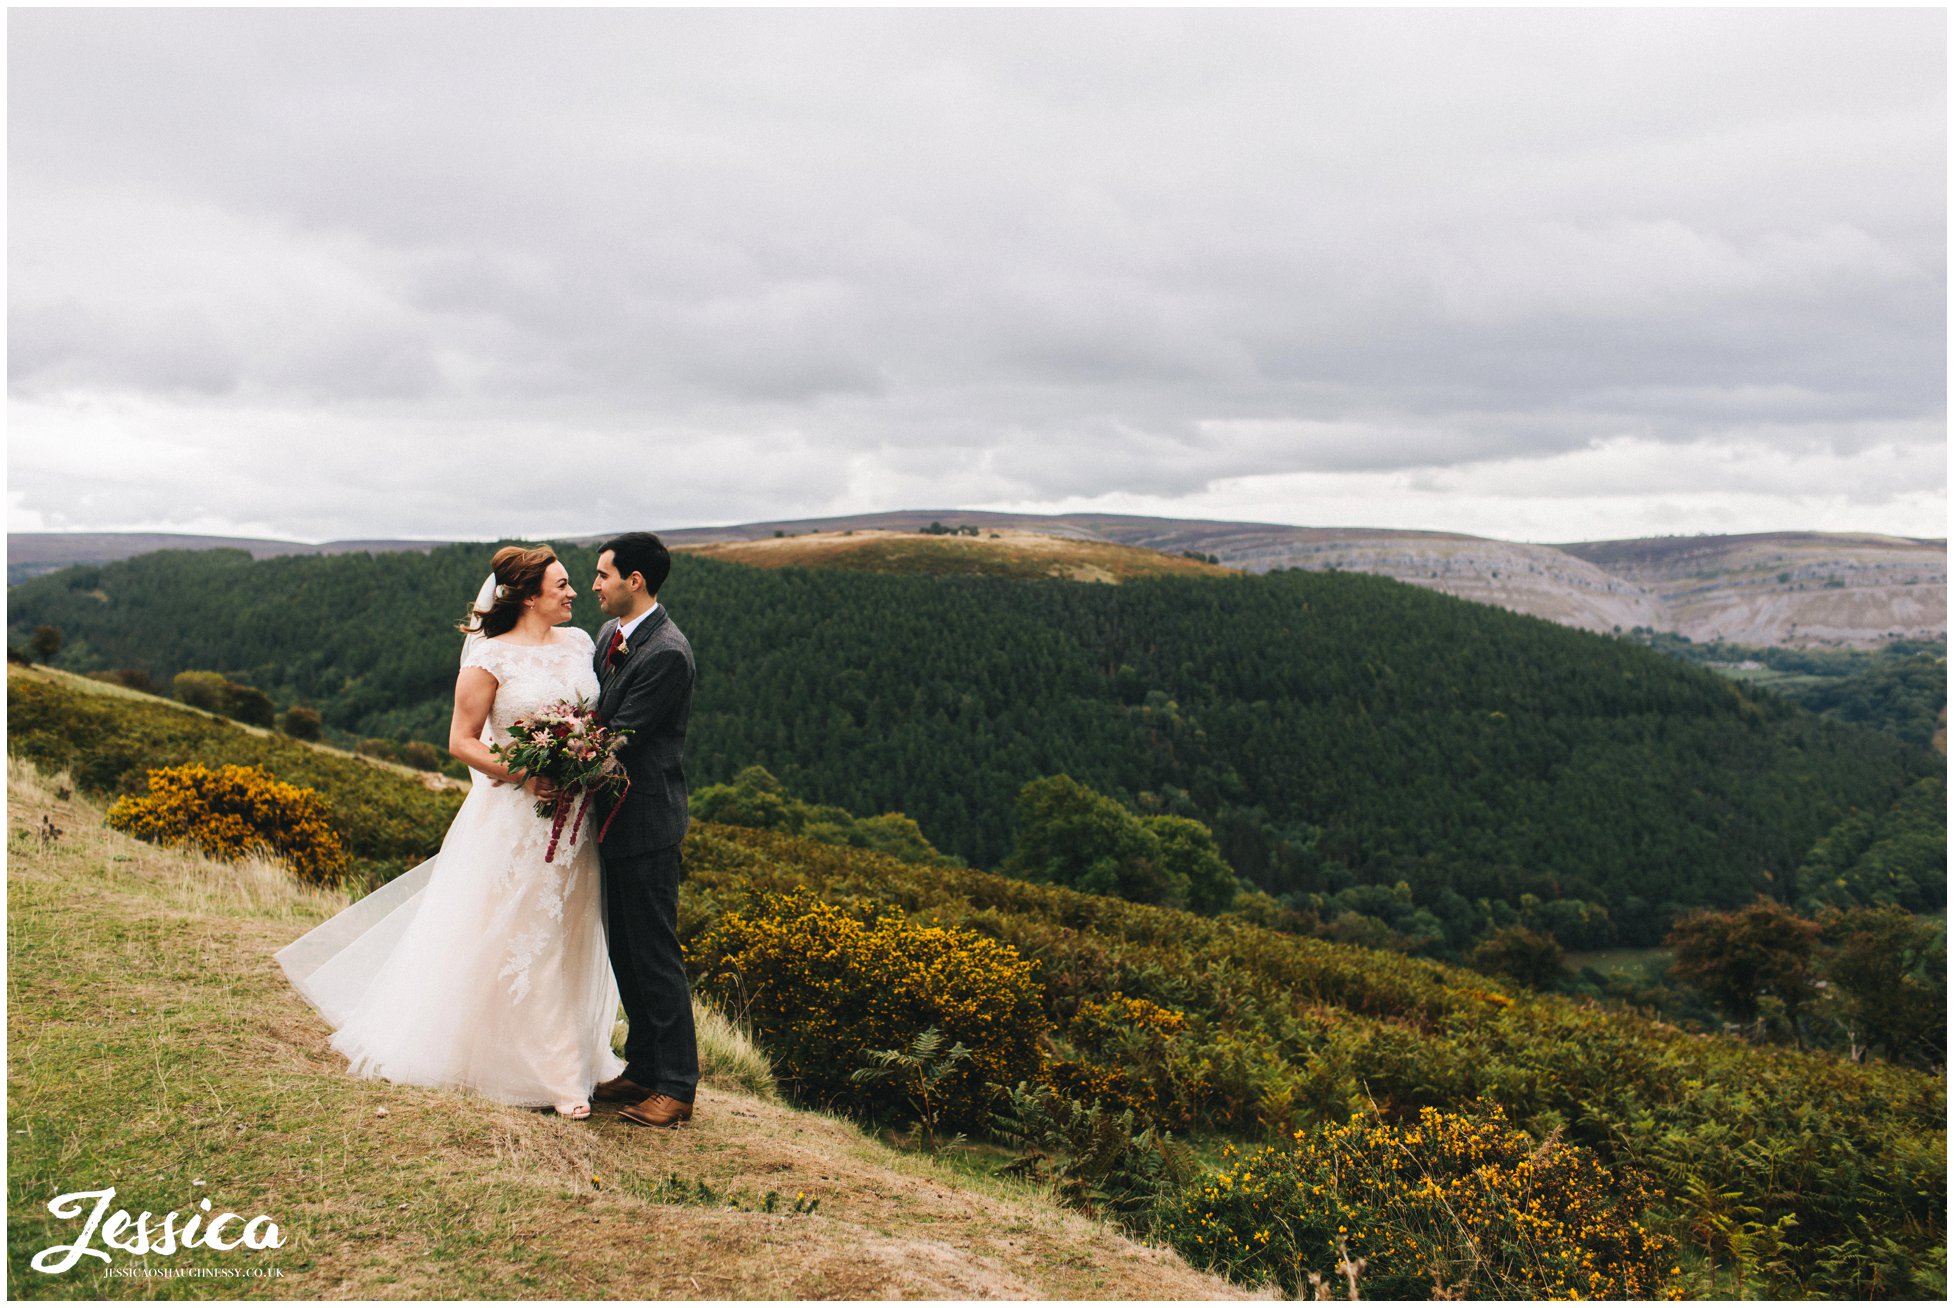 the newly wed's hold each other at the top of the welsh valleys